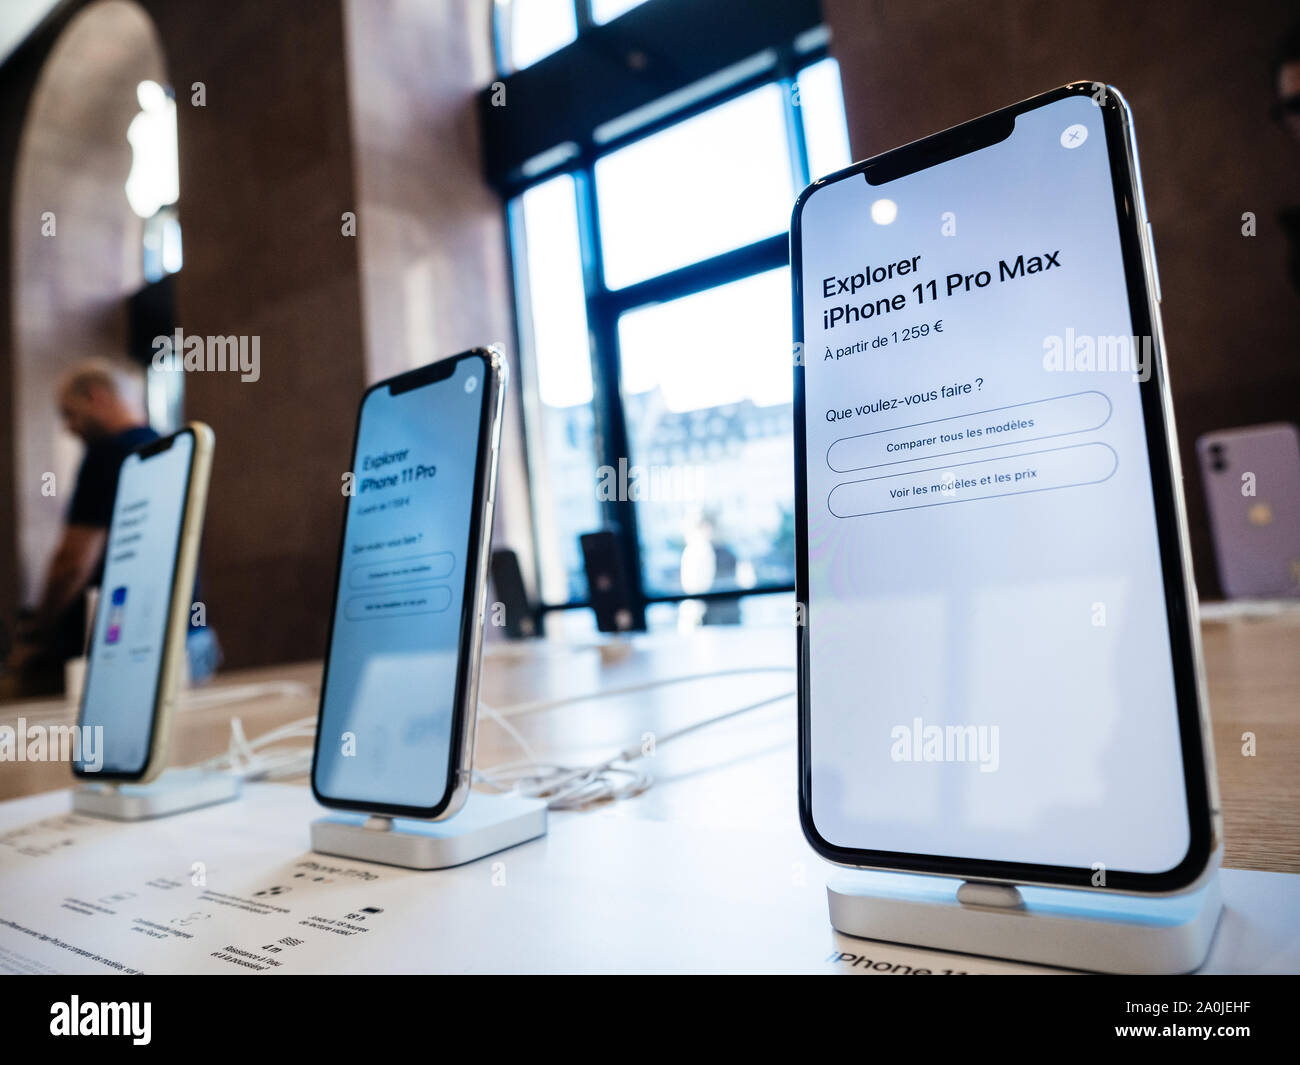 Paris, France - Sep 20, 2019: The new iPhone 11, 11 Pro and Pro Max are  displayed as the smartphone by Apple Computers goes on sale Pro Max  starting price of 1259 euros Stock Photo - Alamy